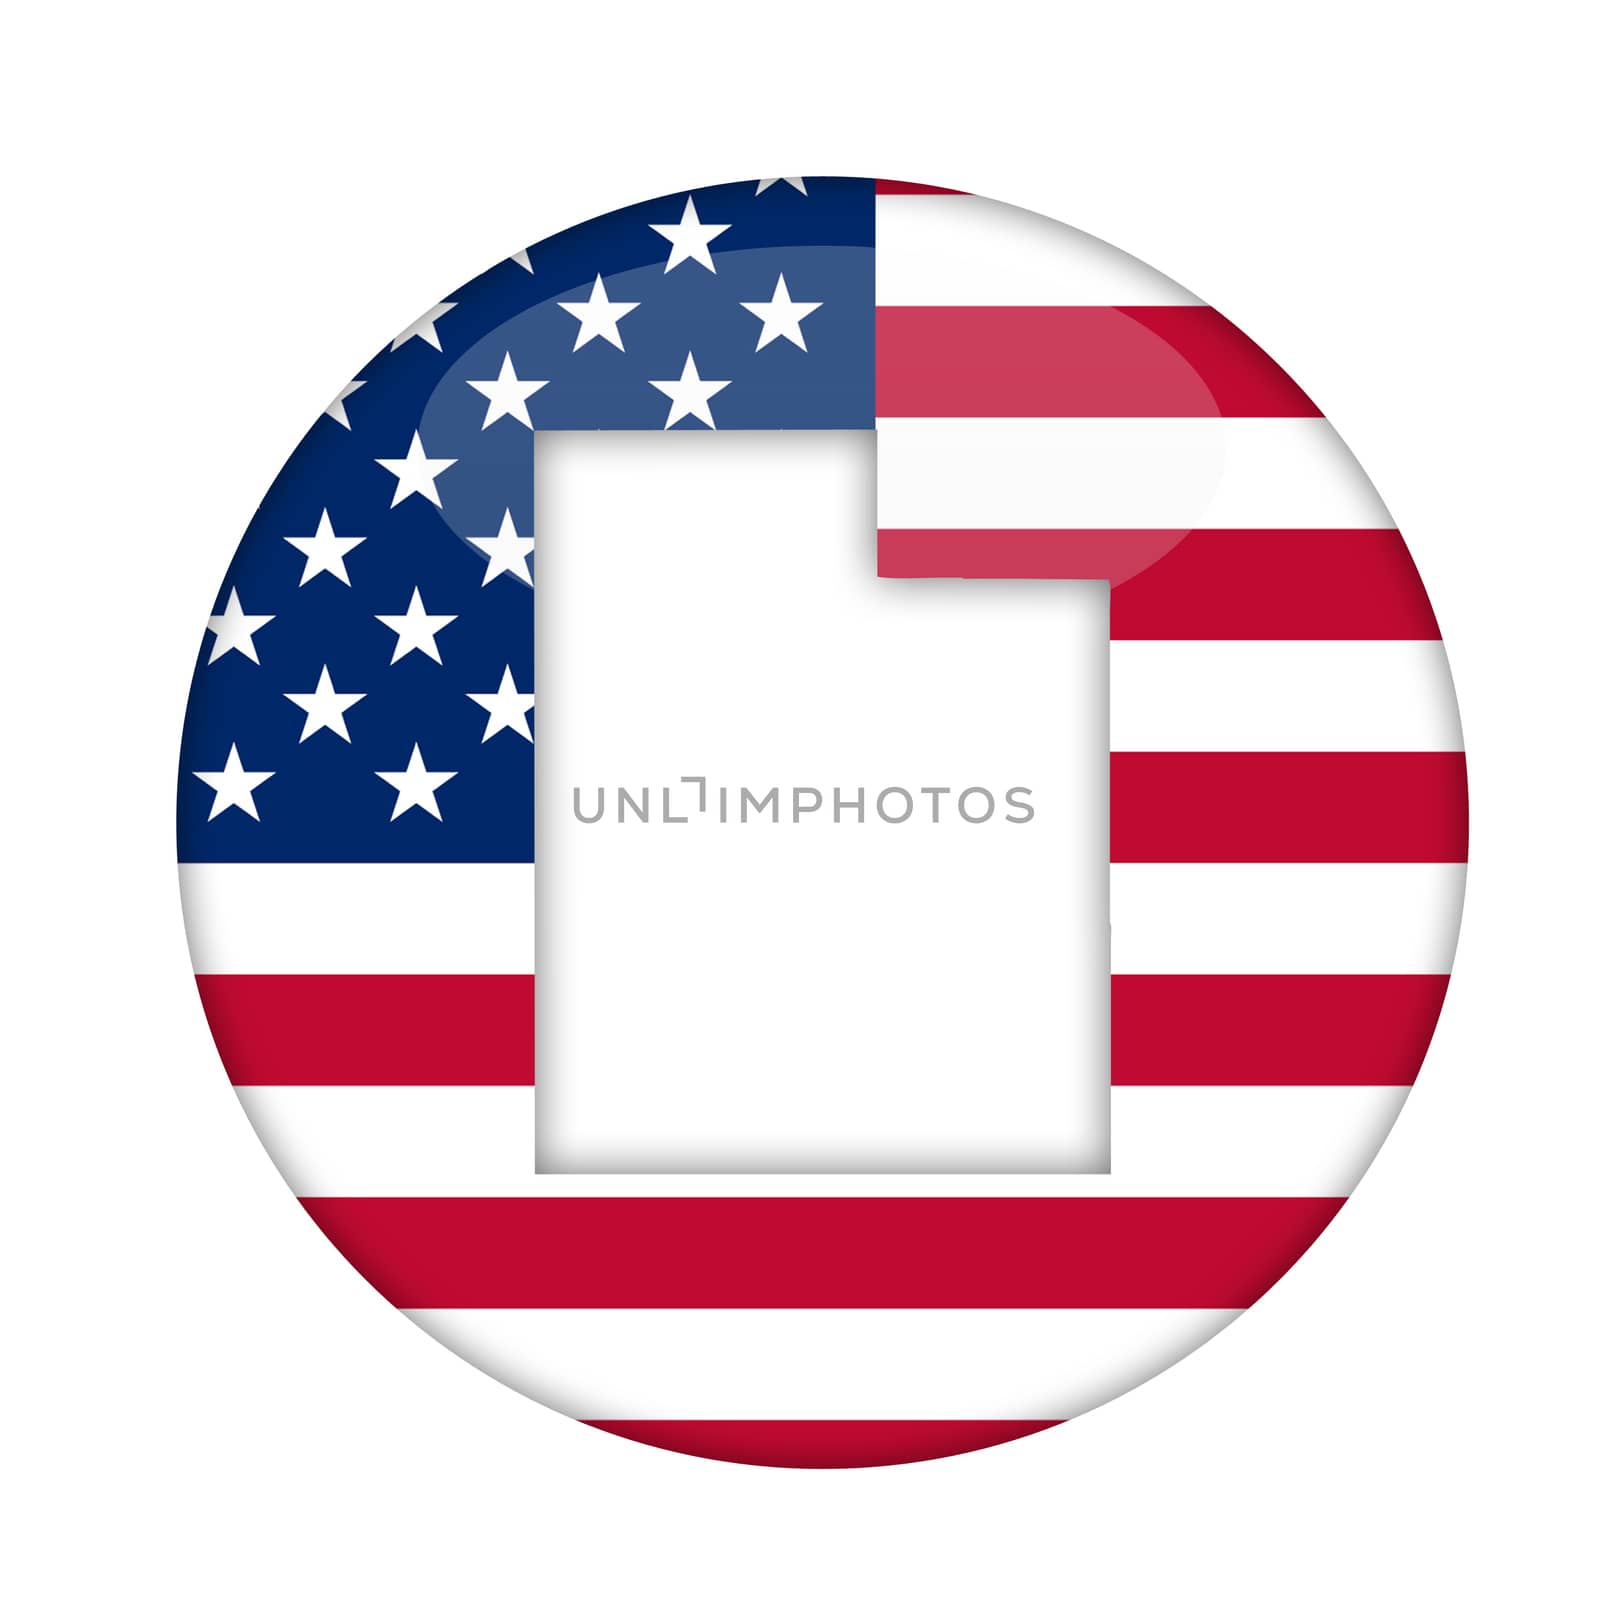 Utah state of America badge isolated on a white background.